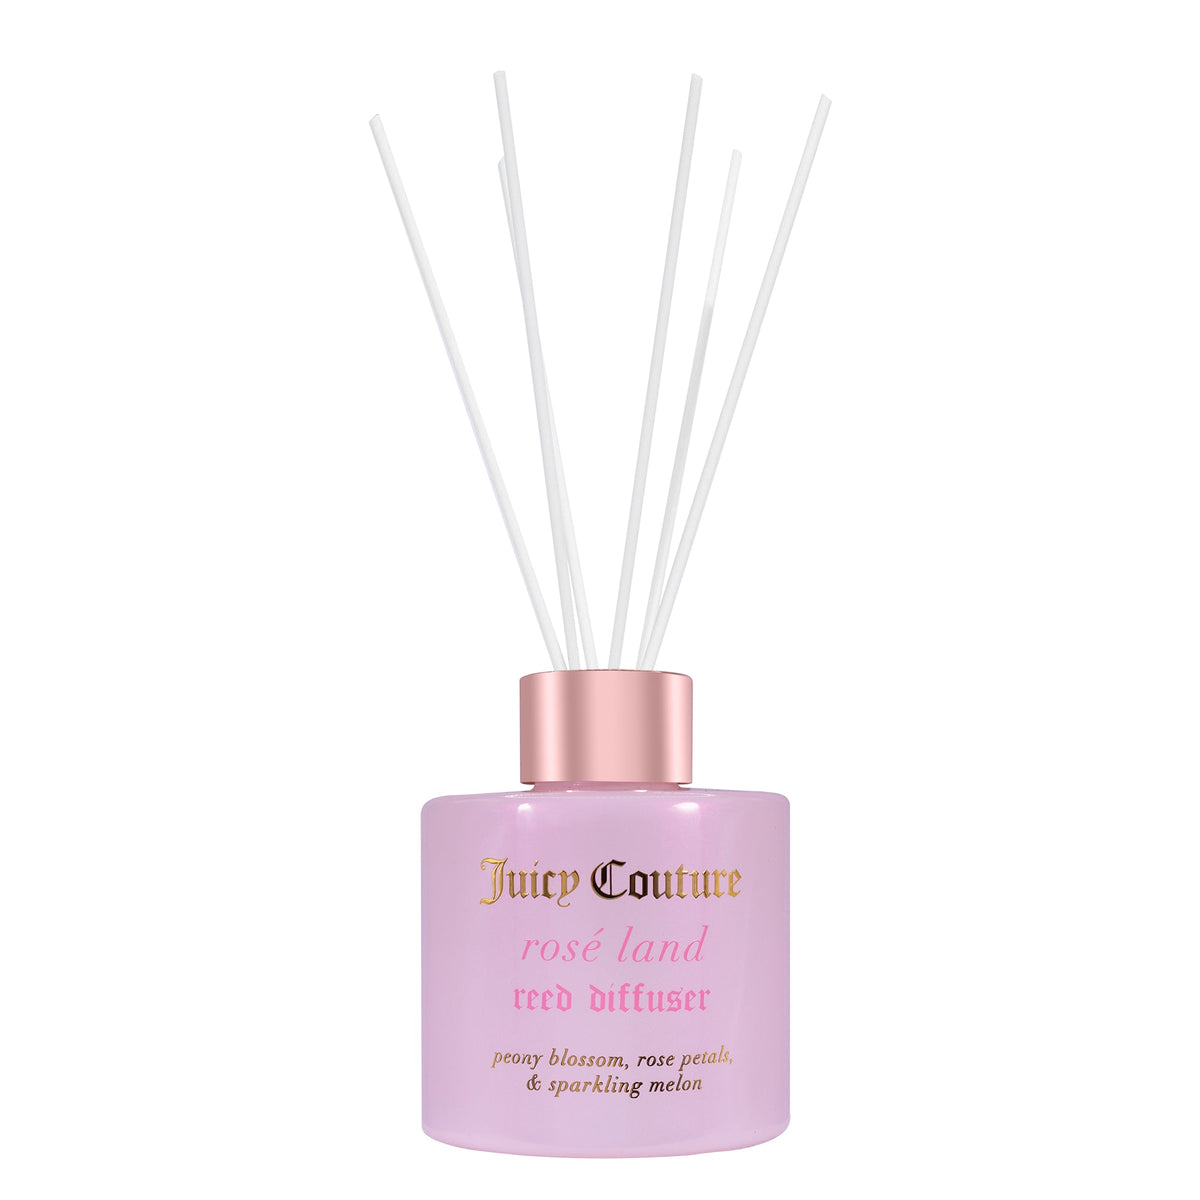 Juicy Couture Rosé Land Reed Diffuser